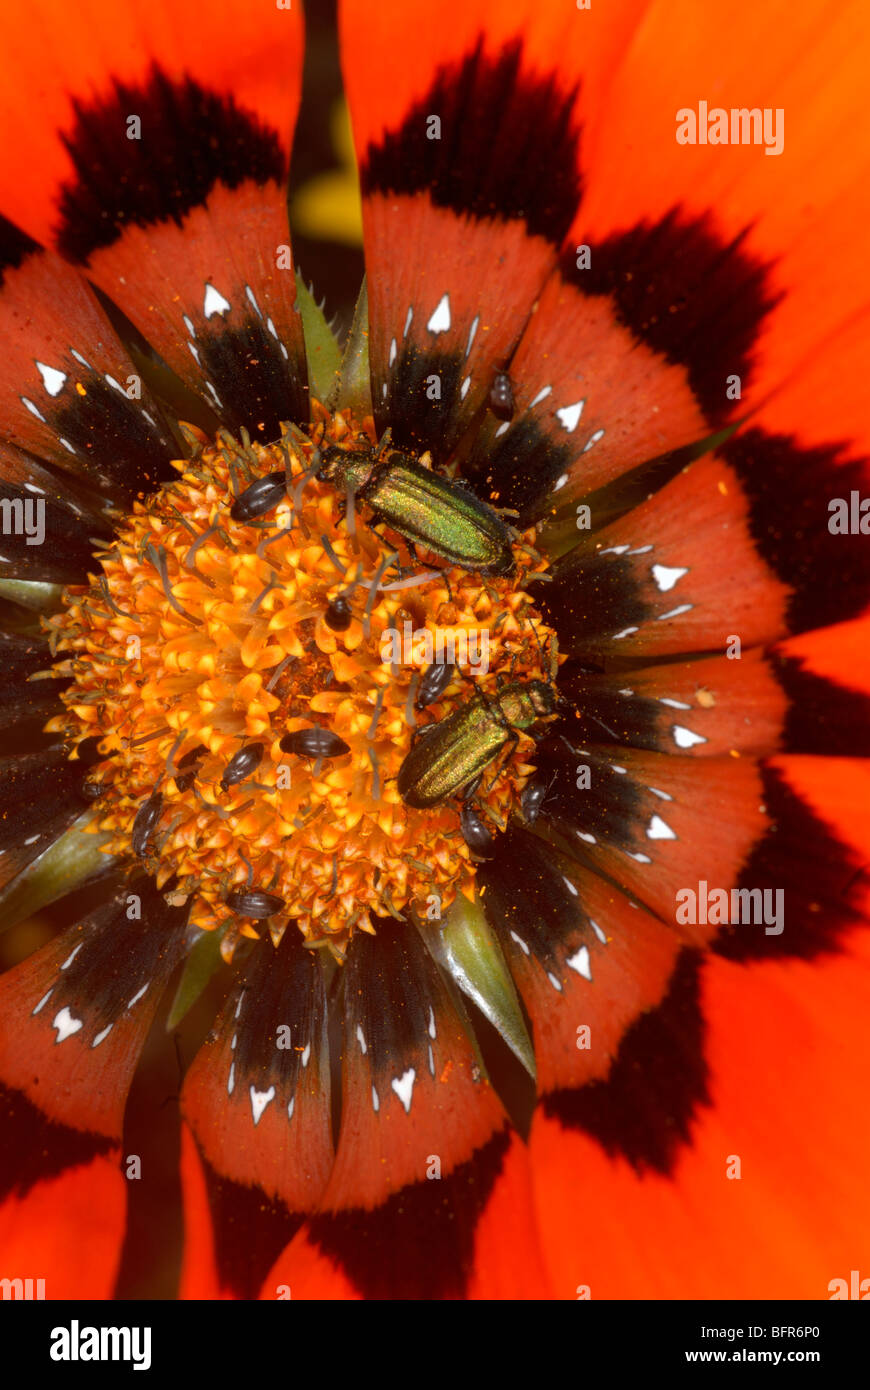 Close-up of Gazania flower and insects Stock Photo